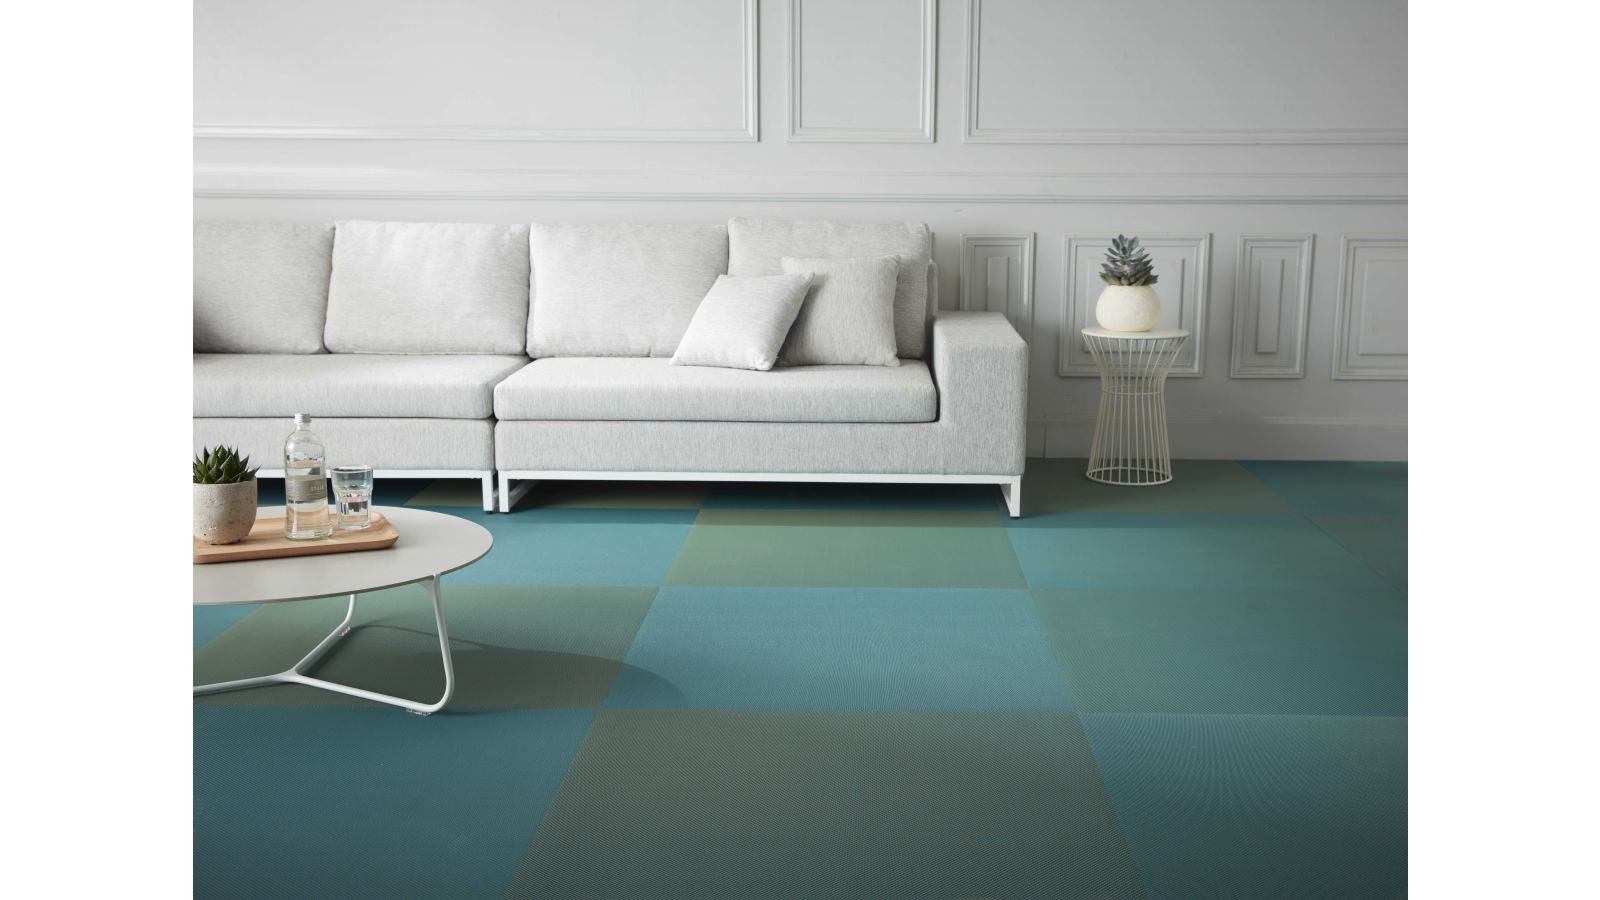 Dickson® Woven Flooring by the makers of Sunbrella®